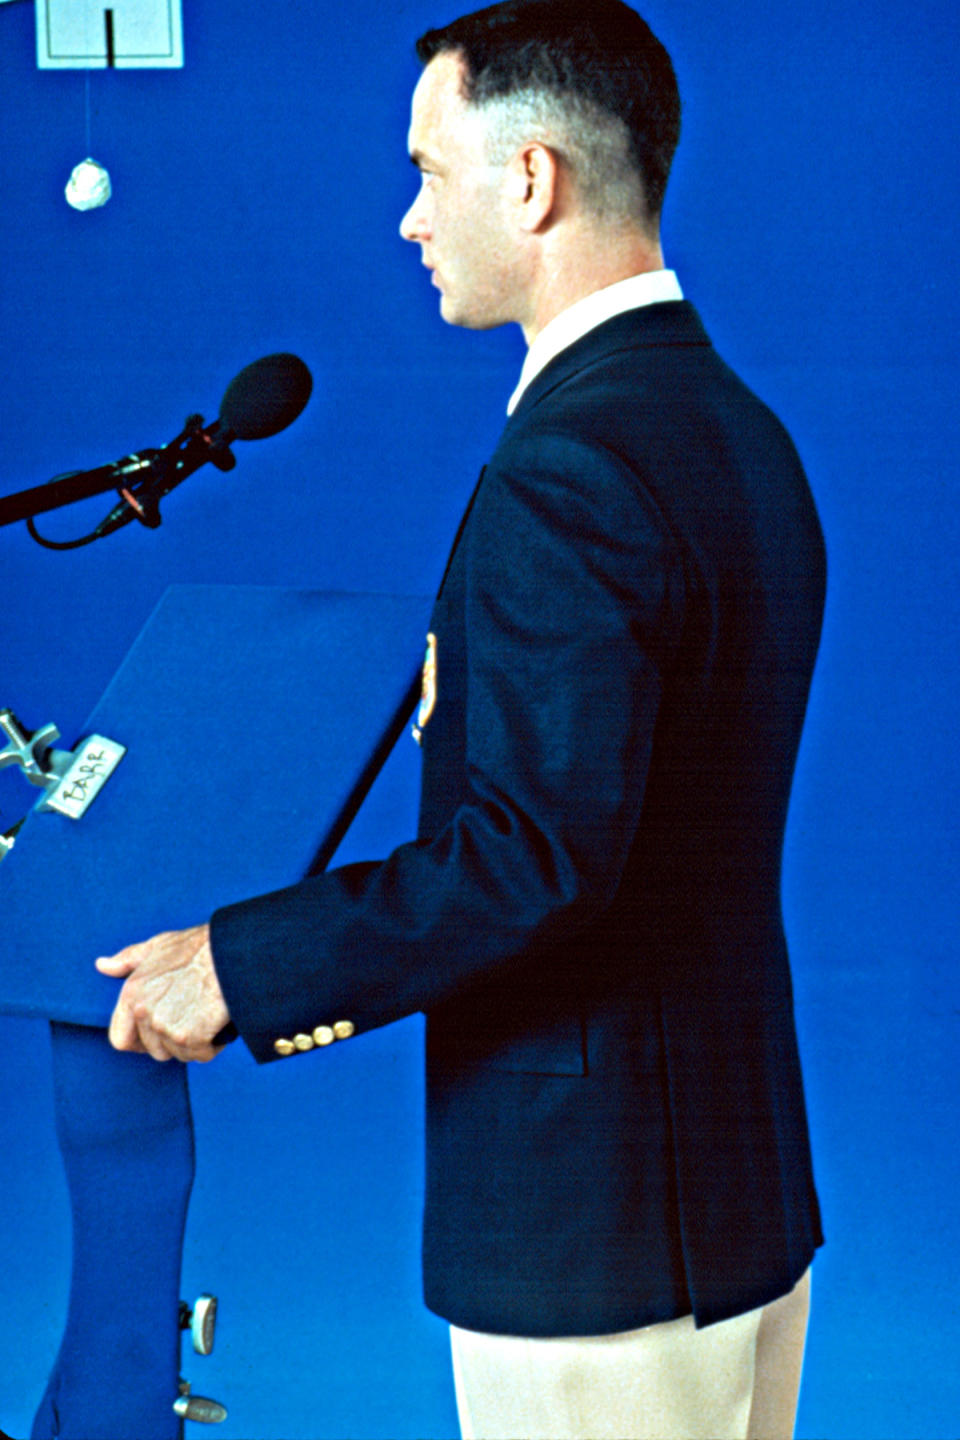 Tom Hanks in a suit speaks at a podium during a press event or speech